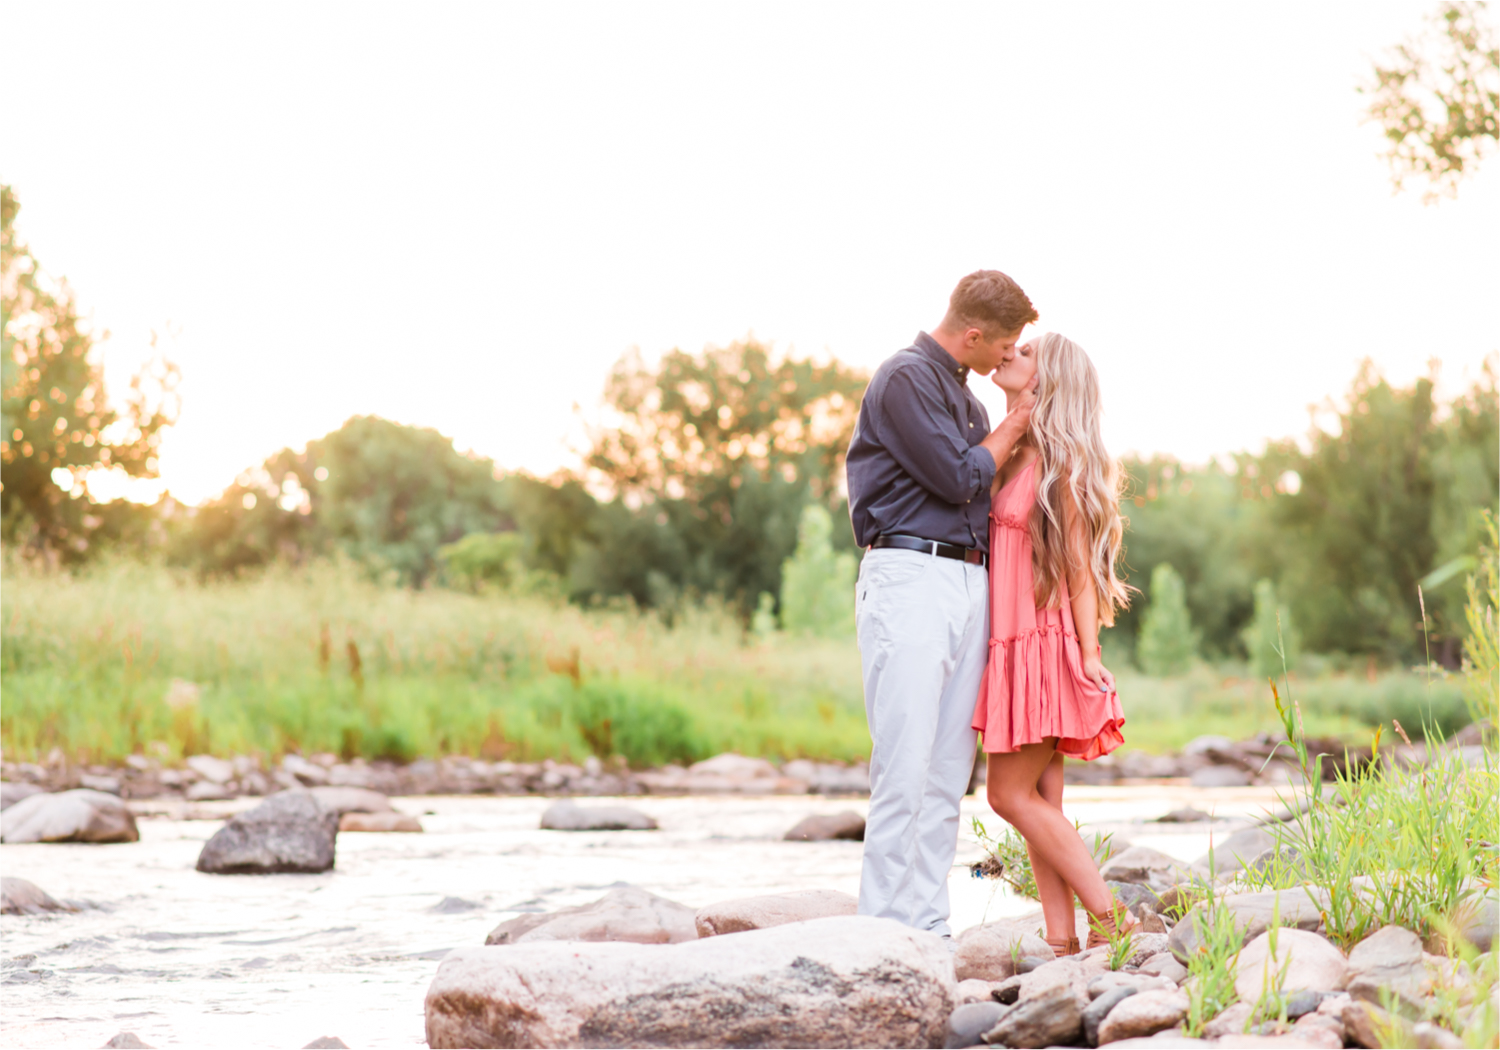 Romantic Winery engagement at Sweet Heart Winery in Loveland  | Britni Girard Photography, Colorado Wedding Photographer | Strolls along the Big Thompson River at Sunset, toasting their engagement with Sweet Heart Wine and dancing in the field during sunset